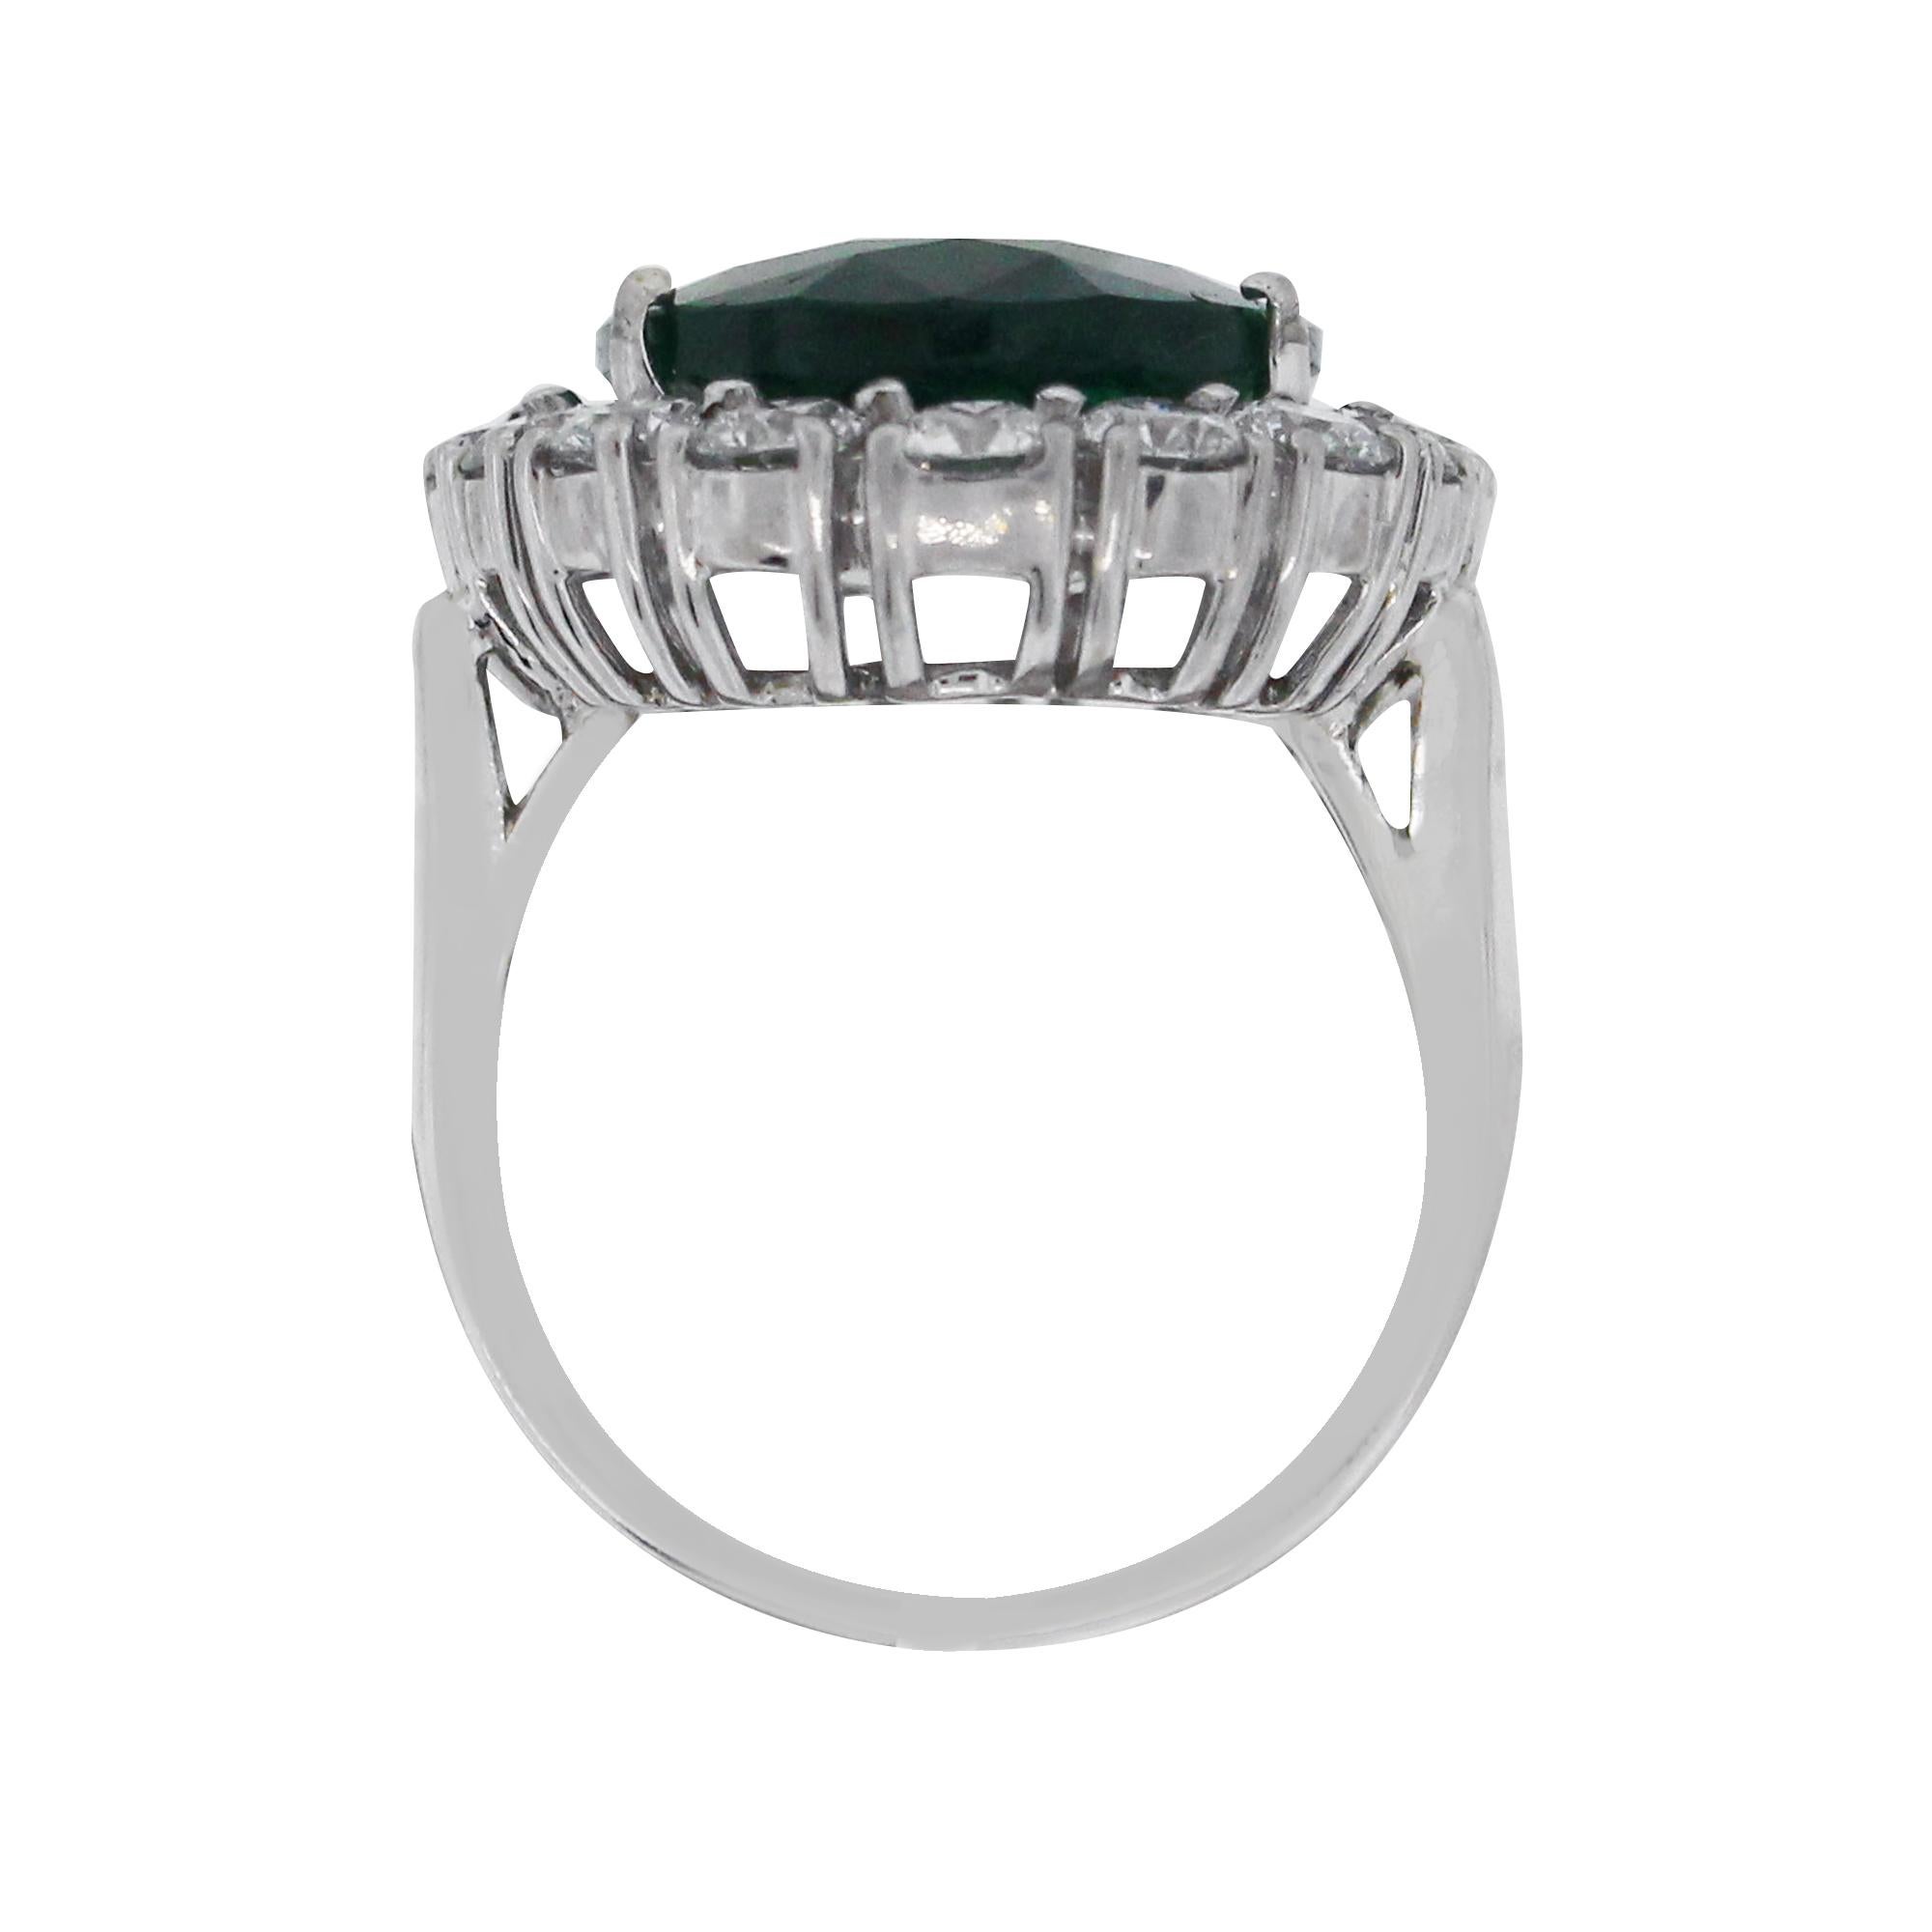 Material: 18k White Gold
Gemstone Details: Approximately 13.04ct oval emerald gemstone
Diamond Details: Approximately 2.77ctw round brilliant diamonds. Diamonds are H/I in color and SI2 in clarity.
Ring Size: 7
Total Weight: 15.2g